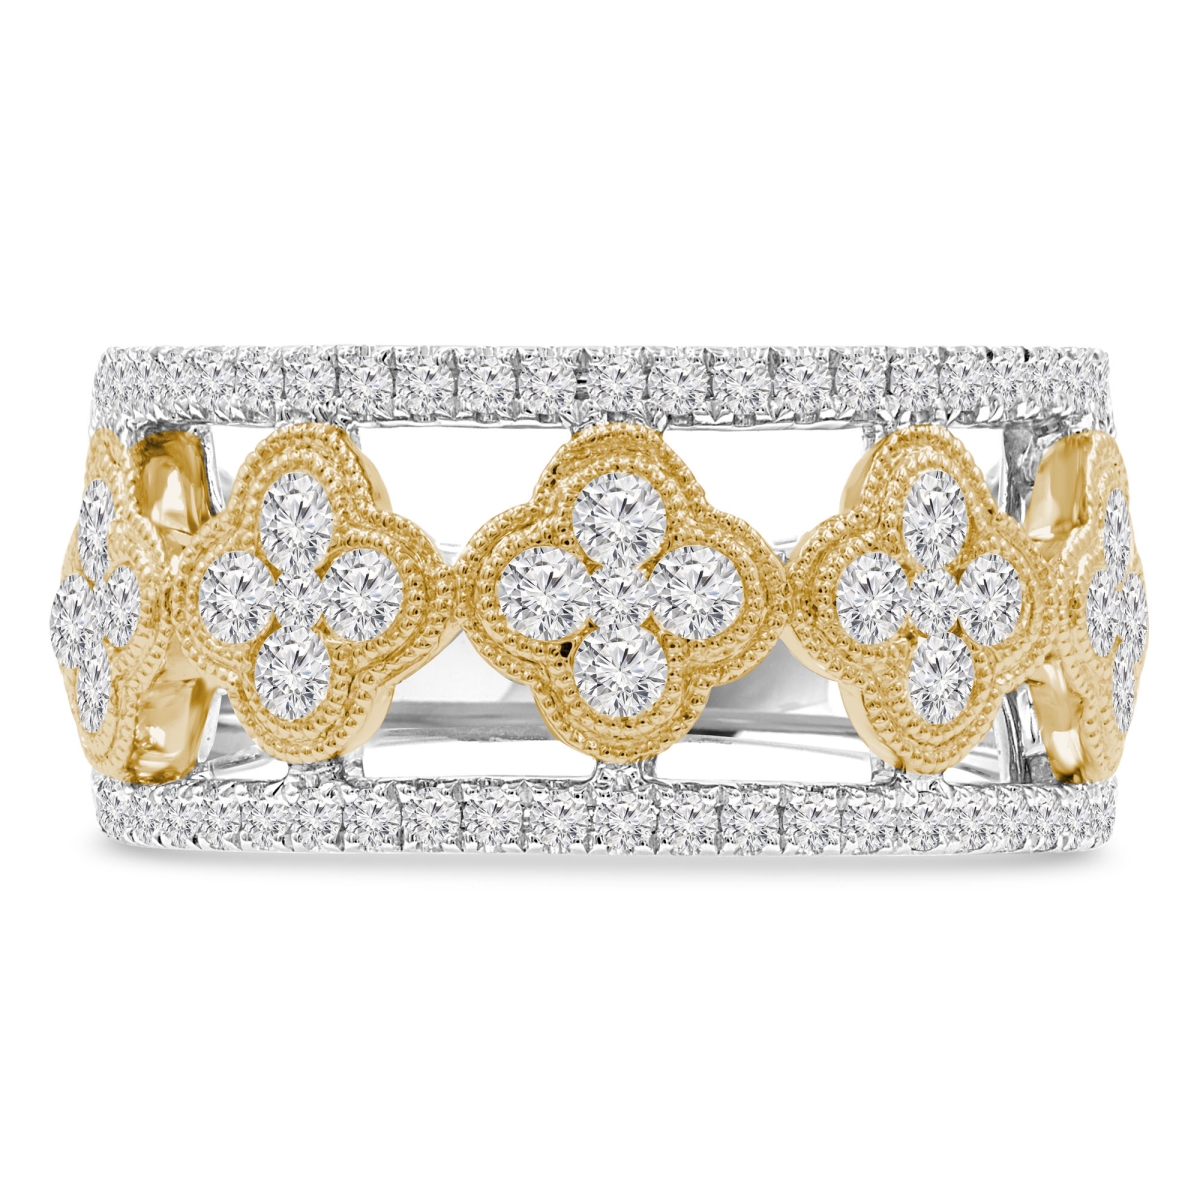 Picture of Majesty Diamonds MDR210140-8.5 1 CTW Round Diamond Cocktail Ring in 14K Two-Tone Gold - Size 8.5